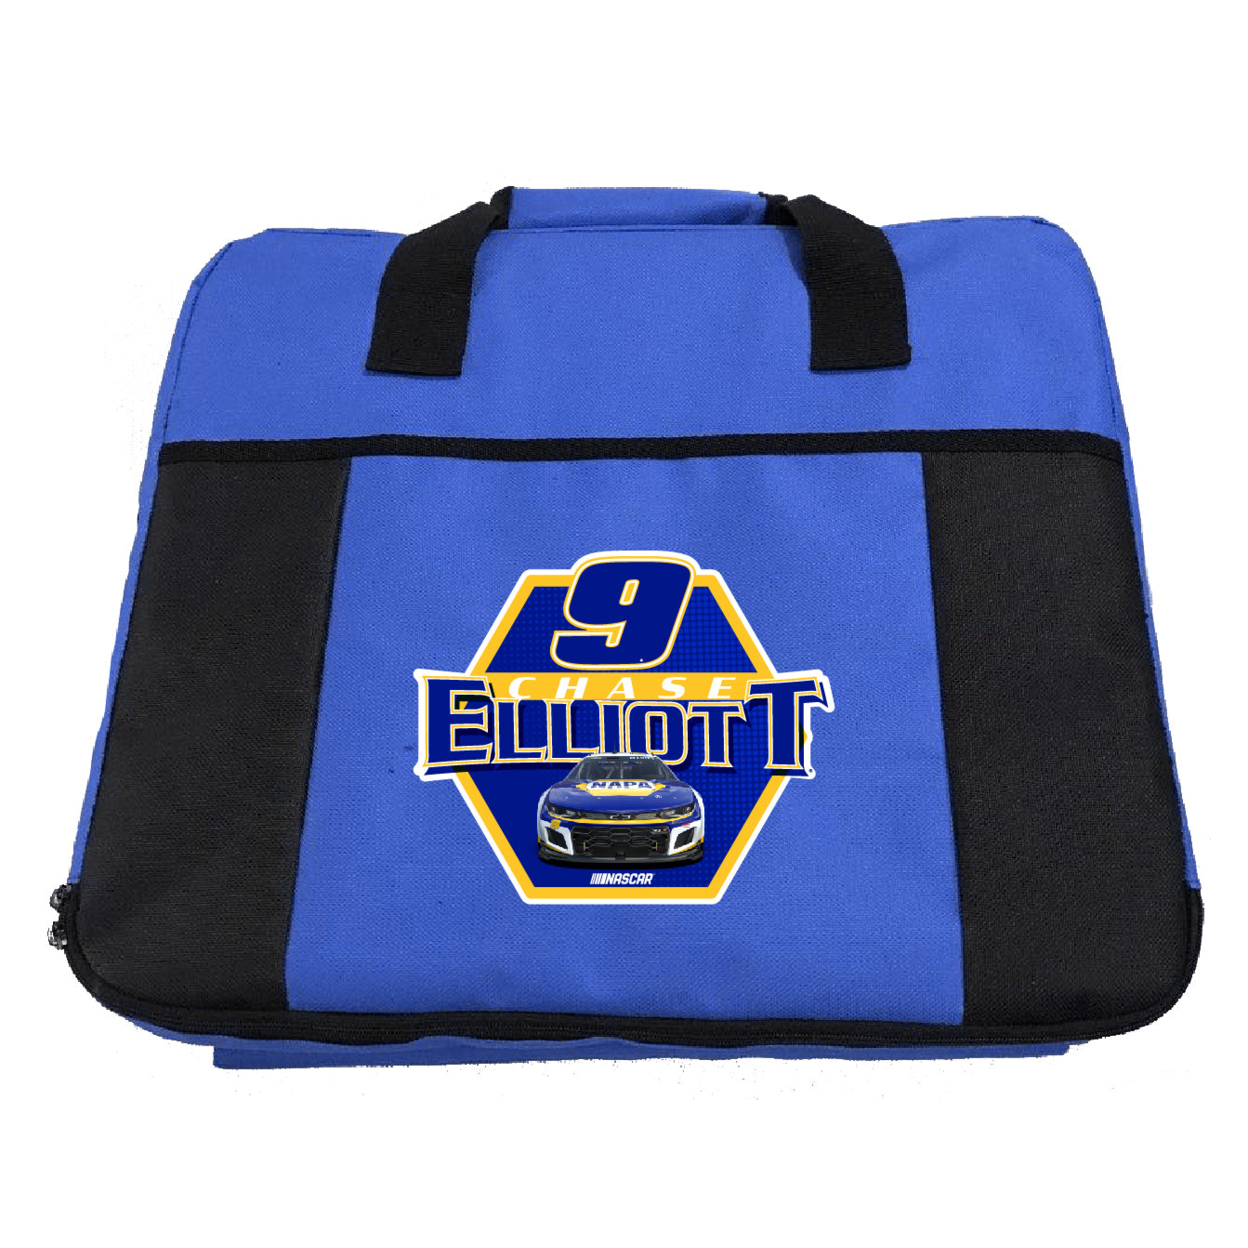 # 9 Chase Elliott Officially Licensed Deluxe Seat Cushion